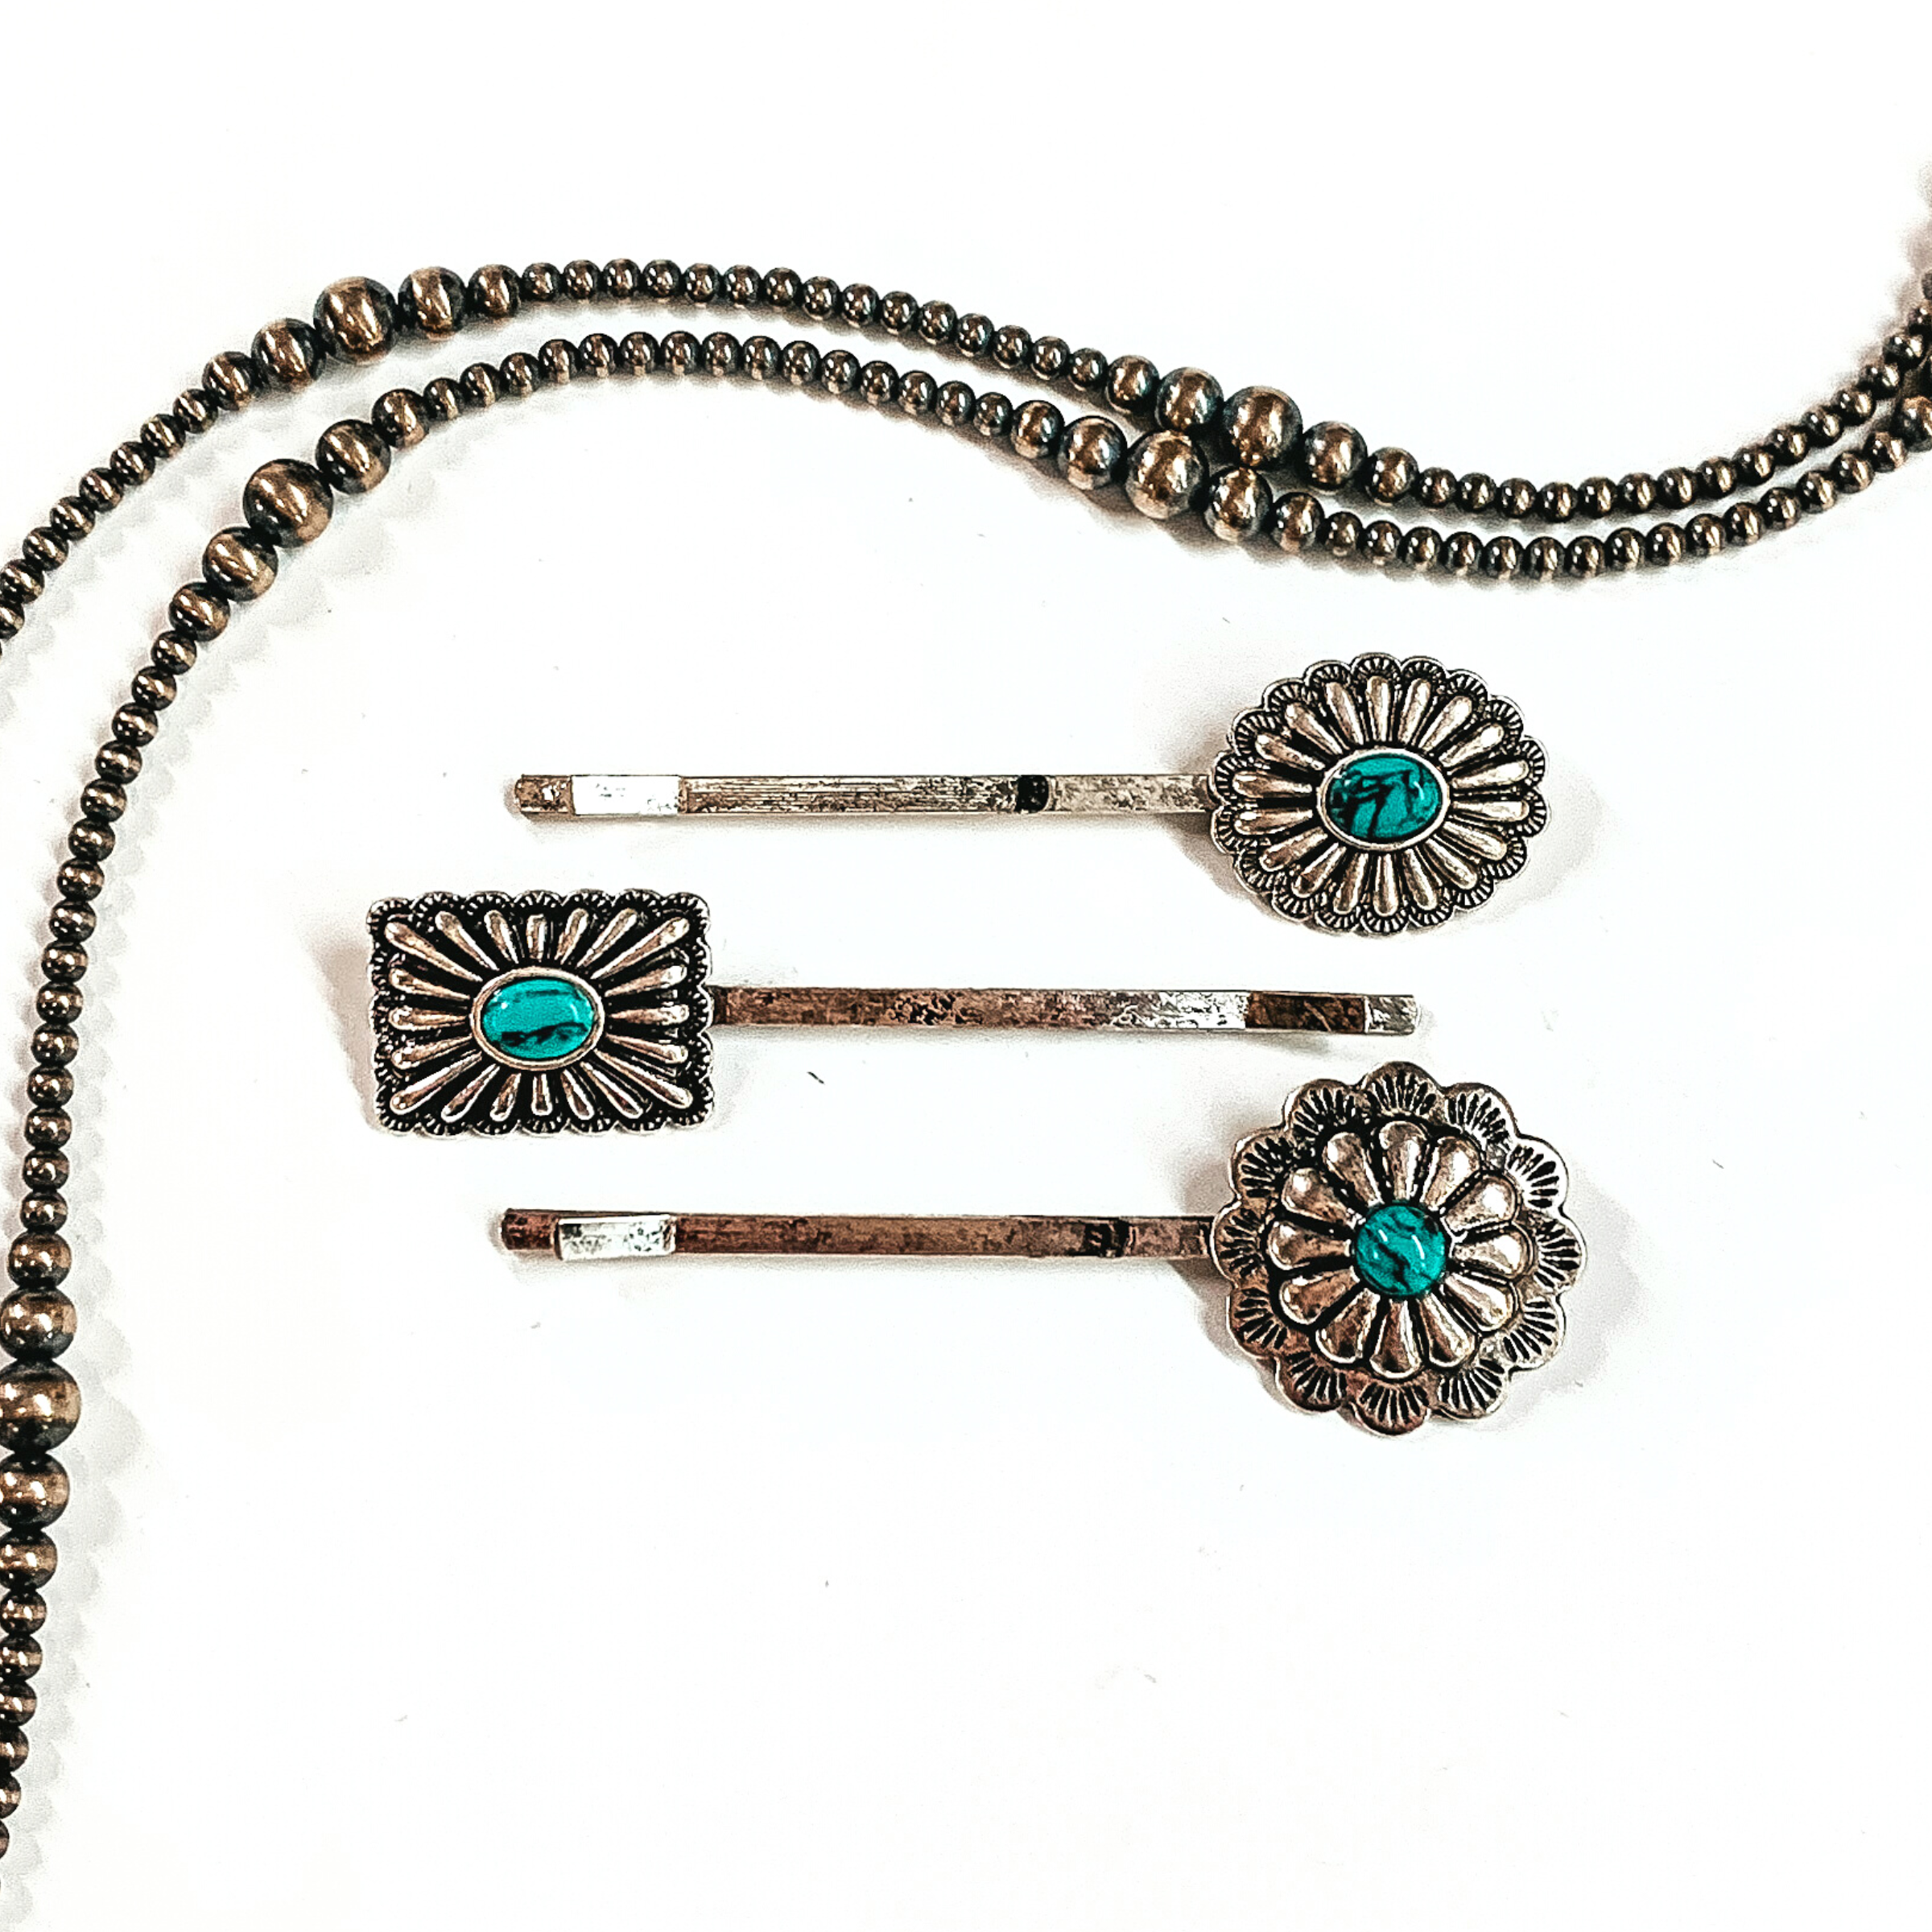 There are three silver bobby pins with conchos and a small faux turquoise stones  in the center of the concho. From top to bottom; an oval concho, rectangle/square  concho, and then a flower concho. These bobby pins are taken on a white background  with silver navajo pearls around as decor.